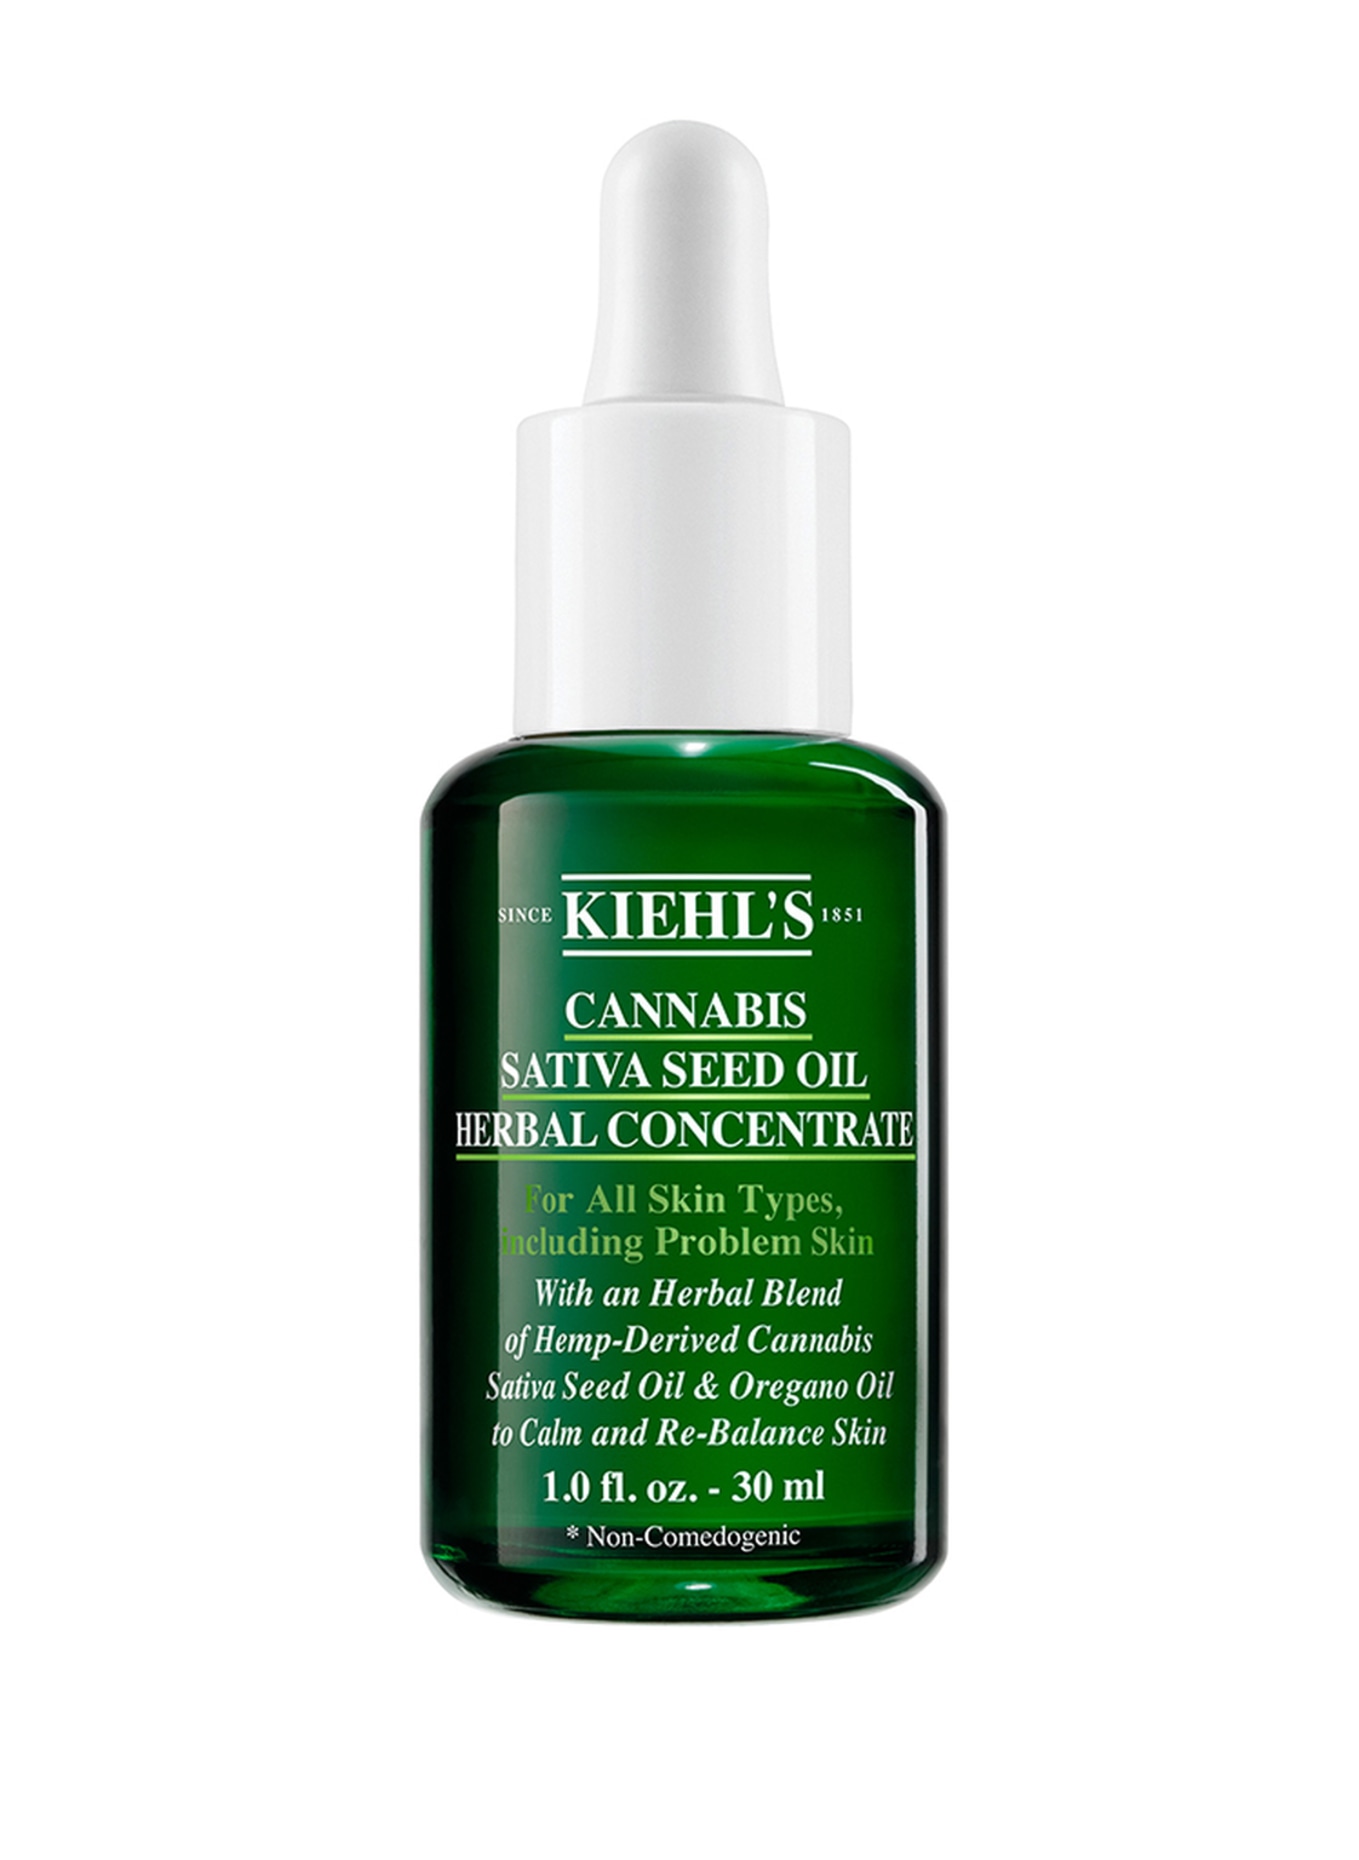 Kiehl's CANNABIS SATIVA SEED OIL HERBAL CONCENTRATE (Obrázek 1)